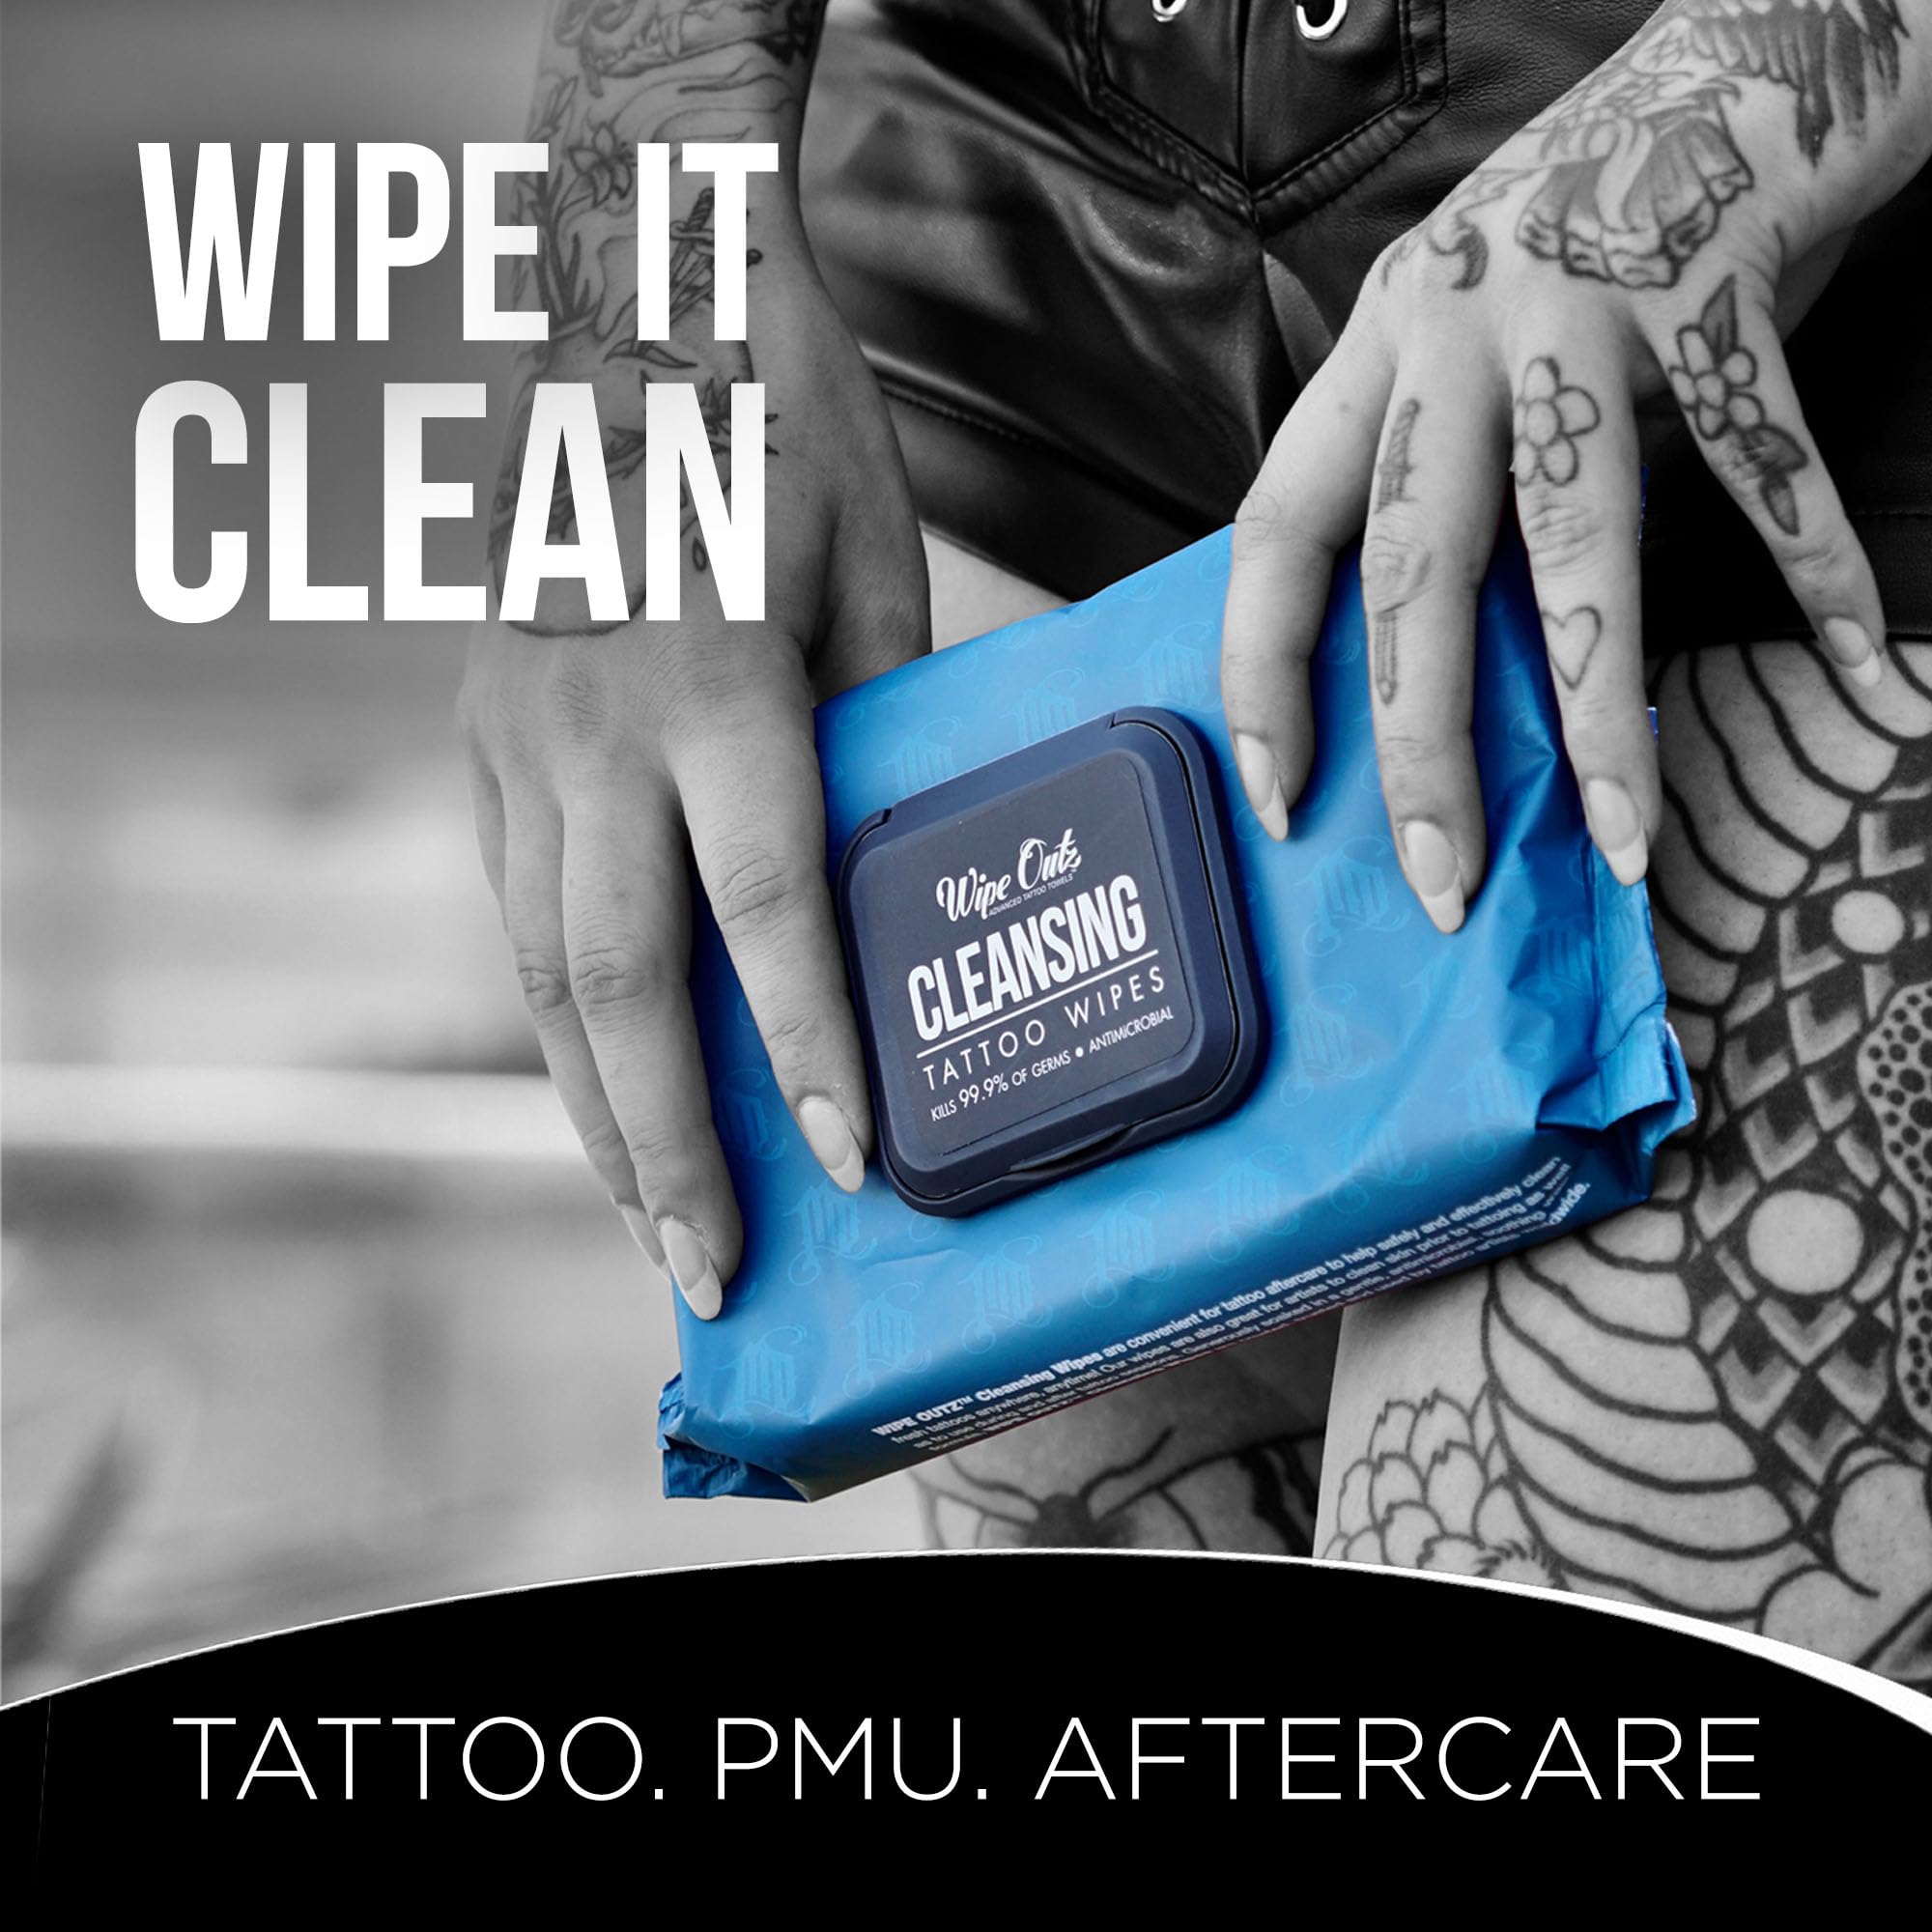 Wipe Outz Cleansing Tattoo Wipes for During Tattooing & Tattoo Aftercare, All in One Cleaning Wipes to Clean Skin, Tattoo Post Care, Tattoo Supplies, Tattoo Aftercare Kit, 480-Count (12 Pack)